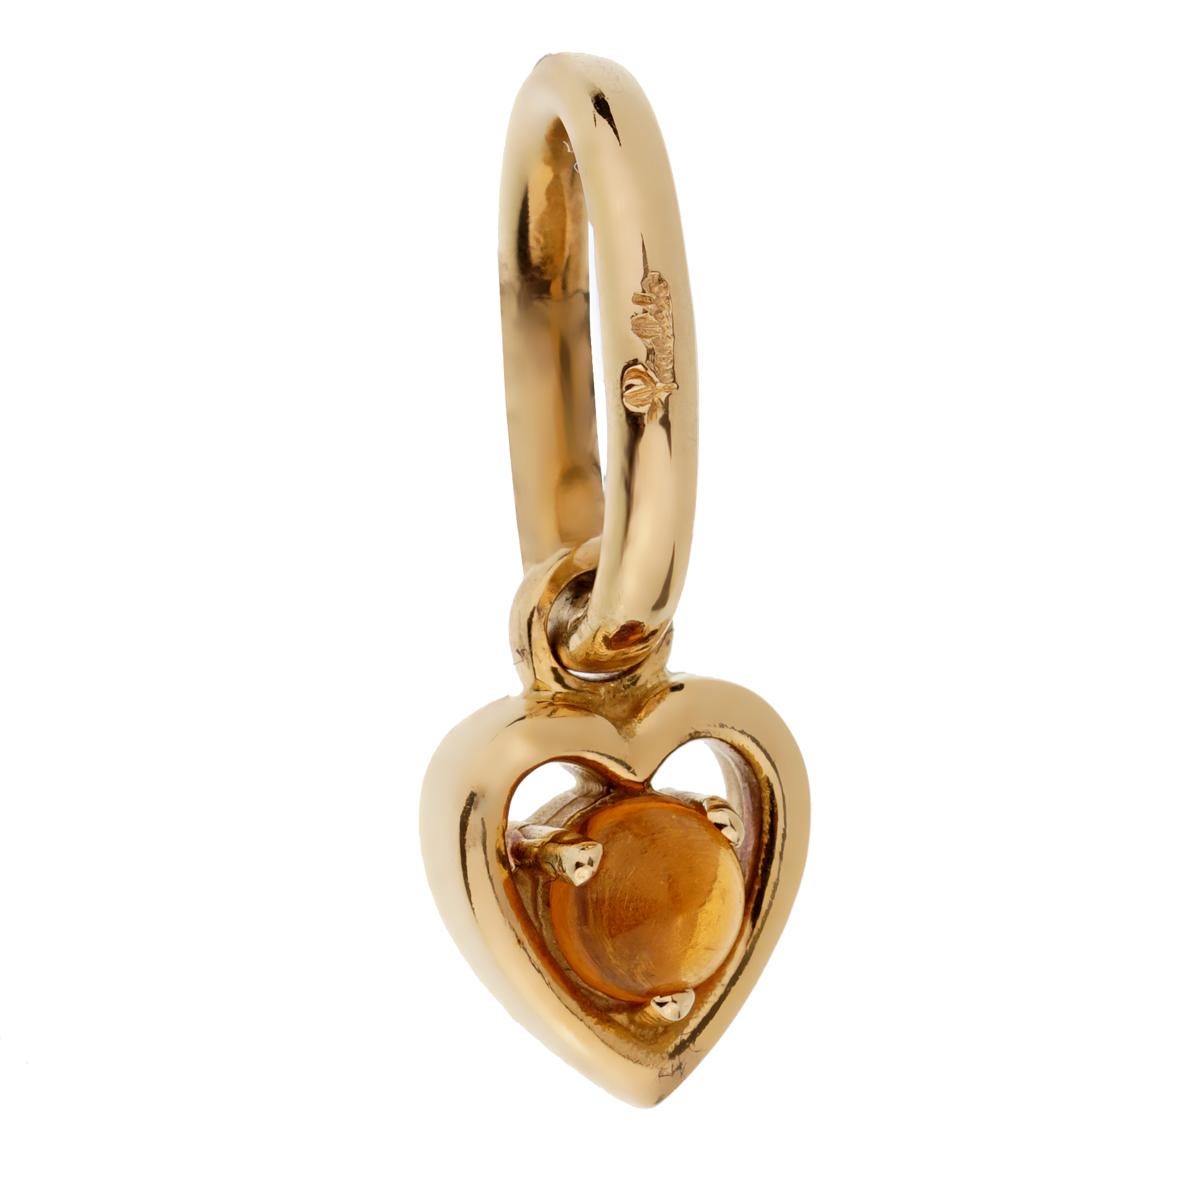 A chic brand new Pomellato charm pendant featuring a .30ct citrine set in 18k yellow gold. 

Sku: 2215